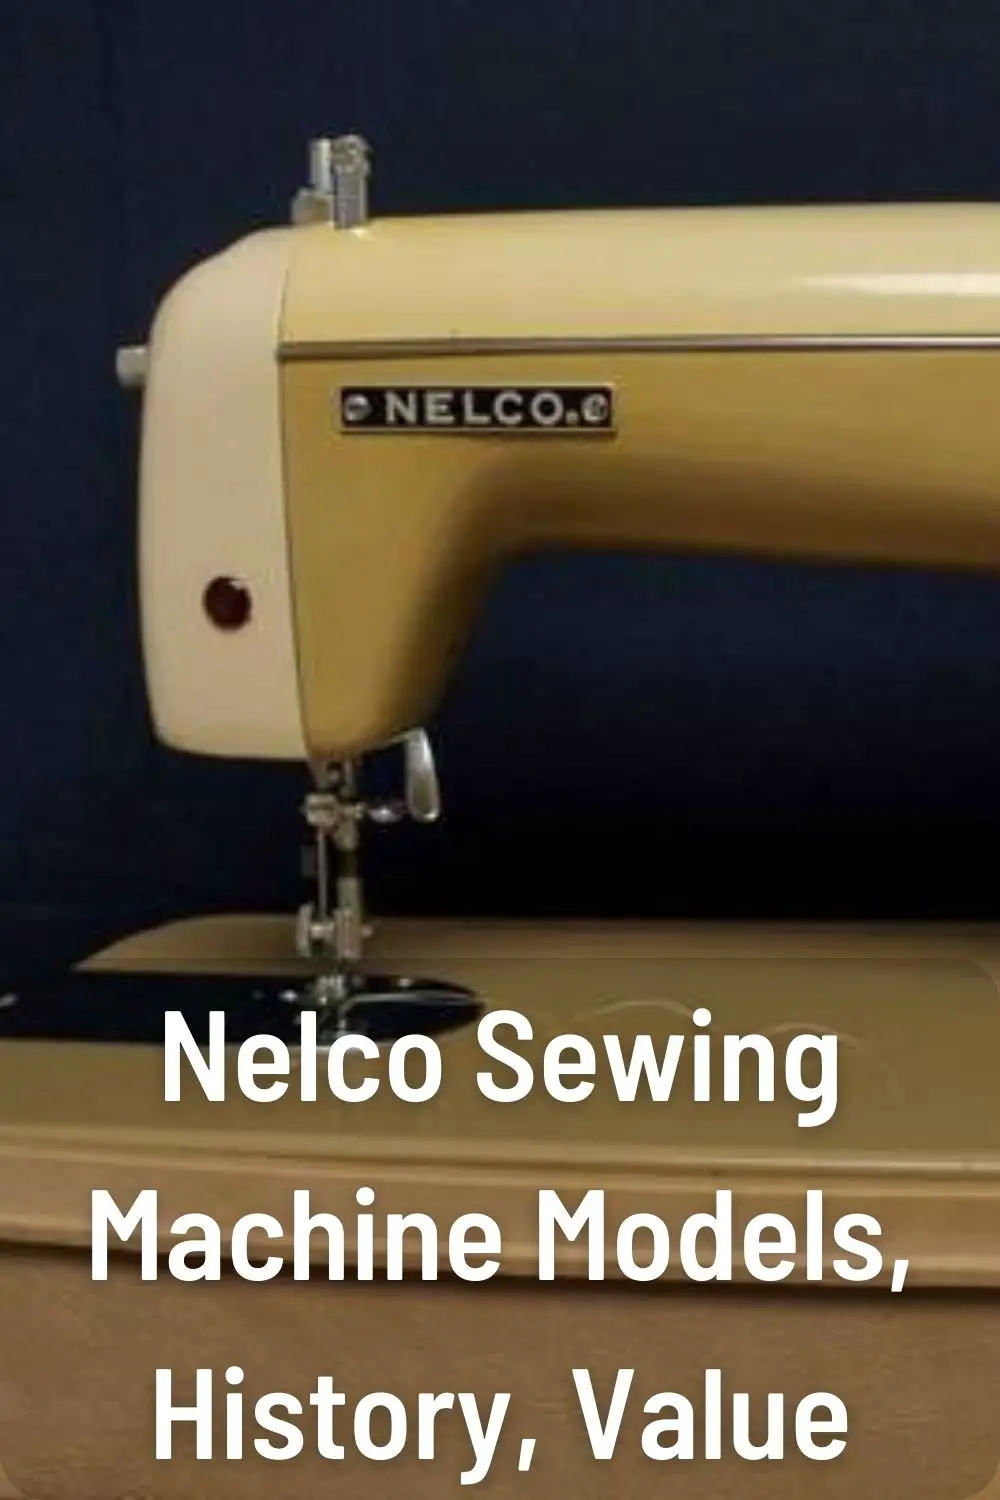 Nelco Sewing Machine Models, History, Value